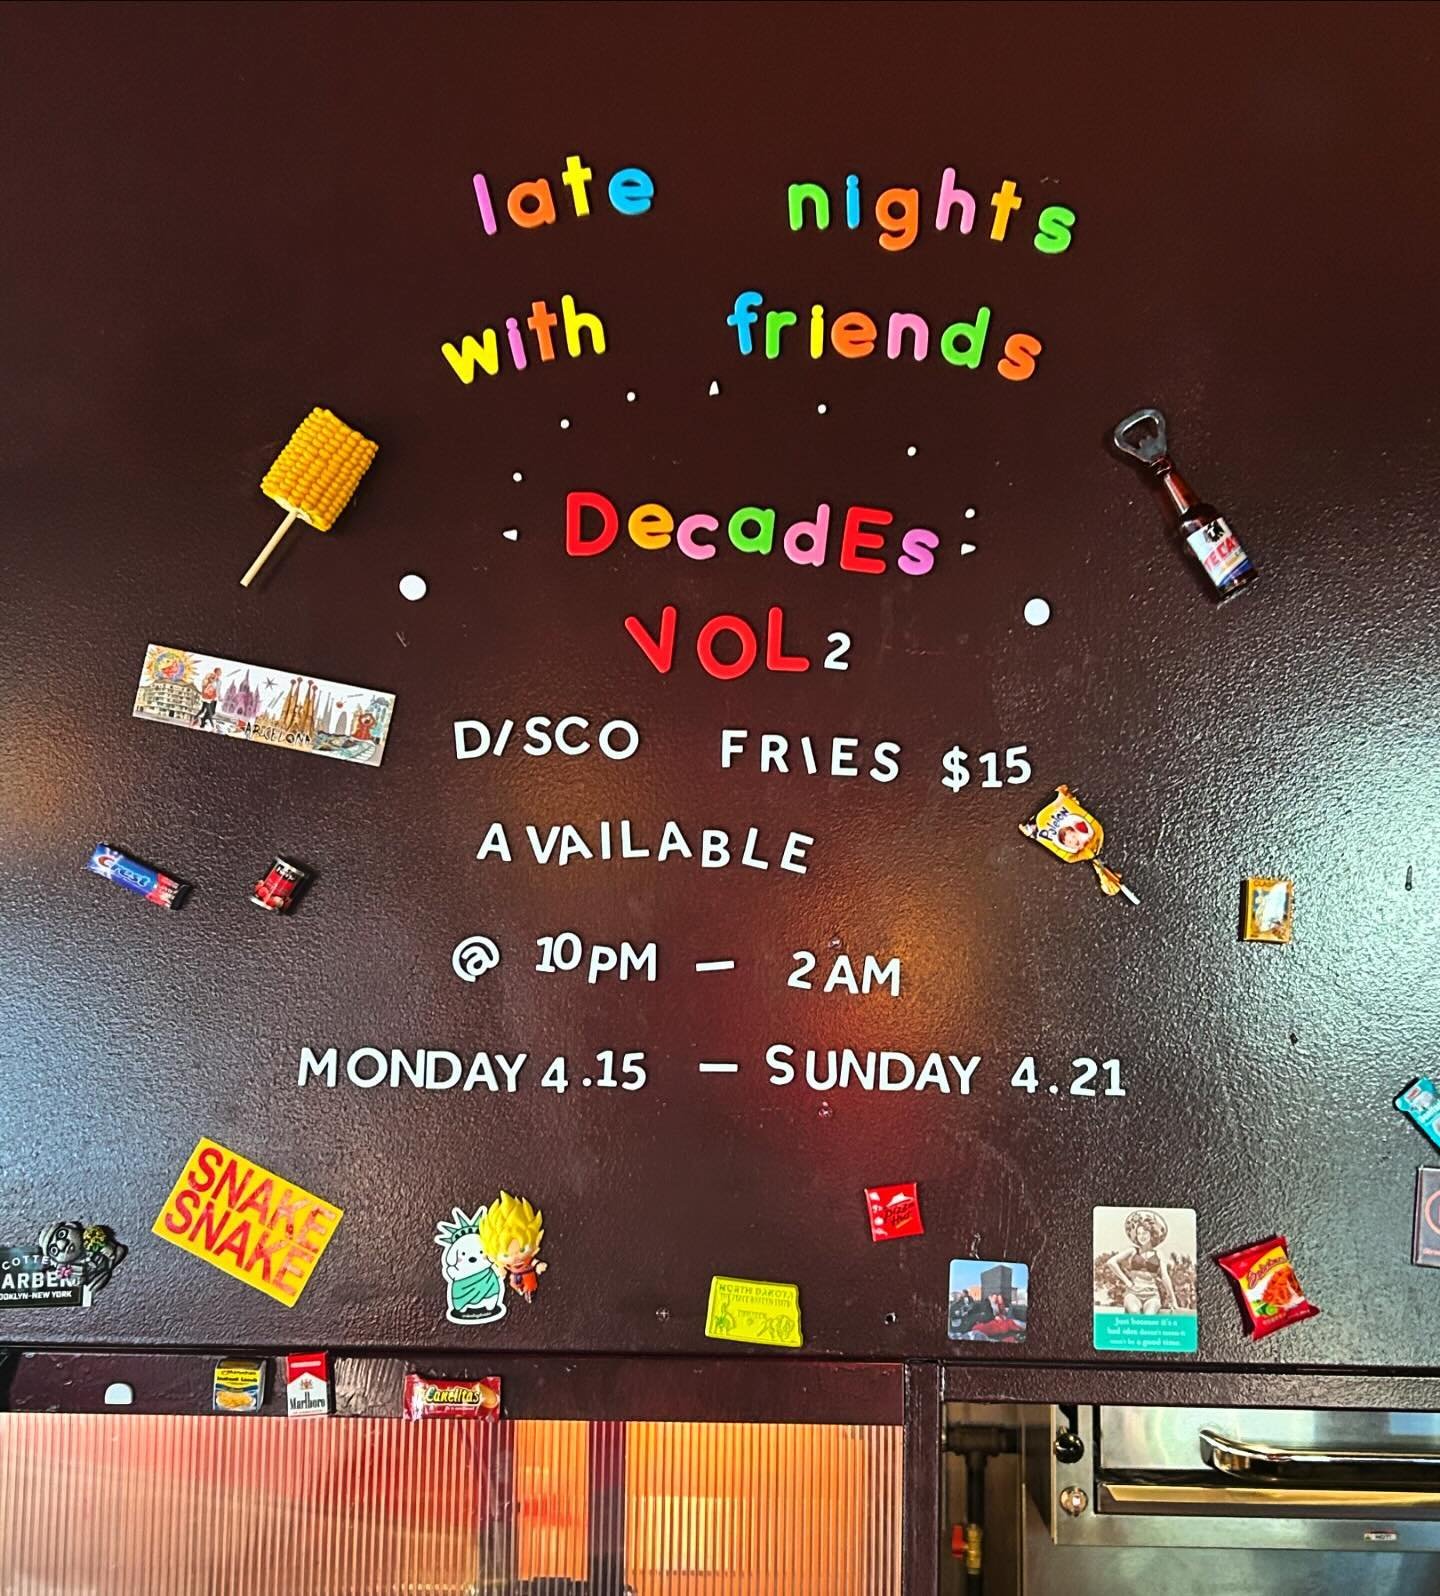 LATE NIGHTS WITH FRIENDS VOL 2 @decades.pizza 

#ridgewood #nyc #popups #discofries